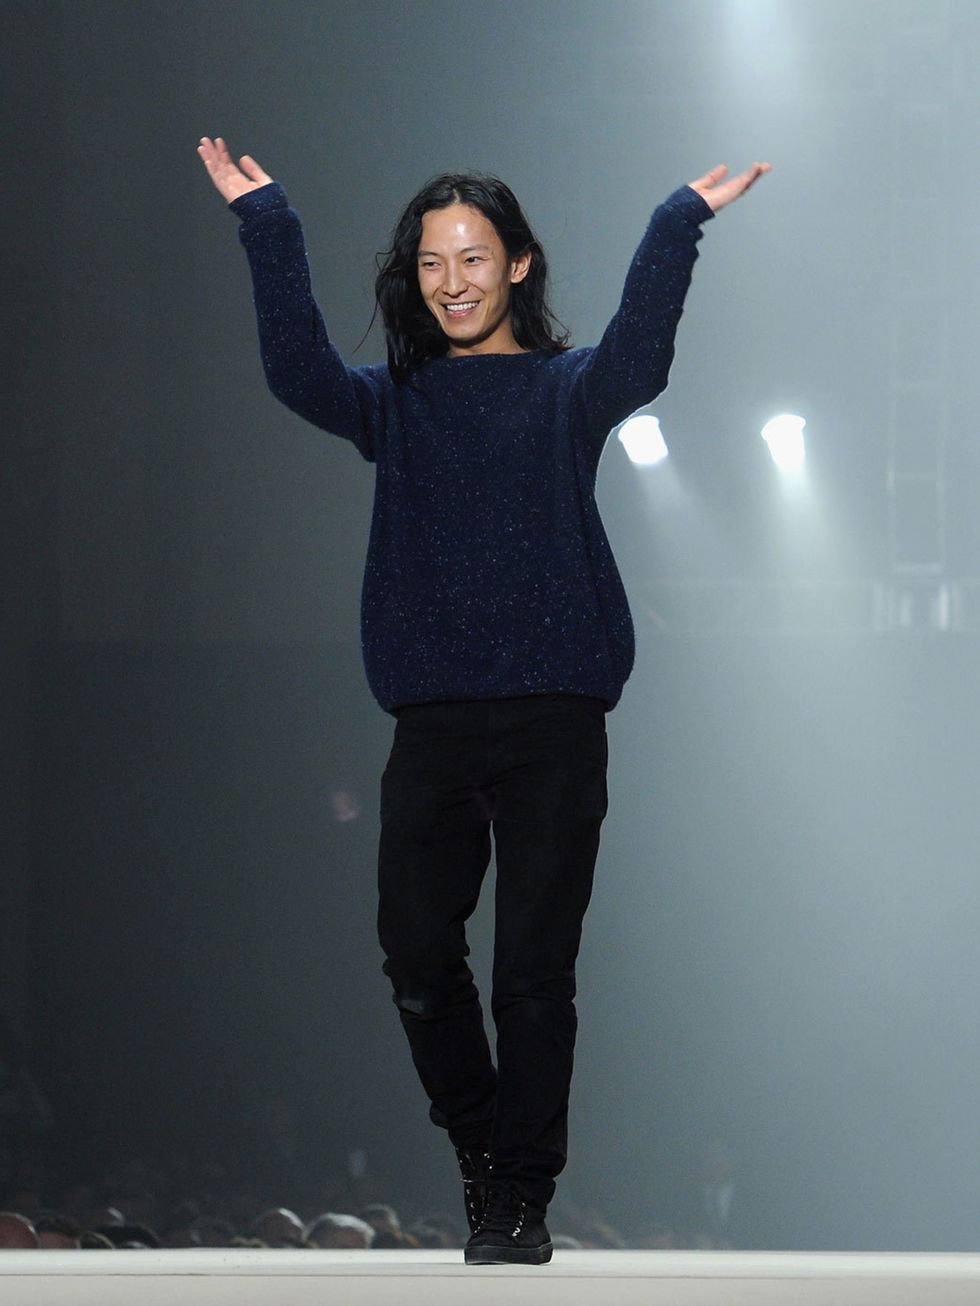 <p>To say were excited about <a href="http://www.elleuk.com/fashion/news/alexander-wang-balenciaga-first-collection-aw13">Alexander Wangs</a> collection at <a href="http://www.elleuk.com/catwalk">NYFW</a> is understating it. Wild for Wang is more like i